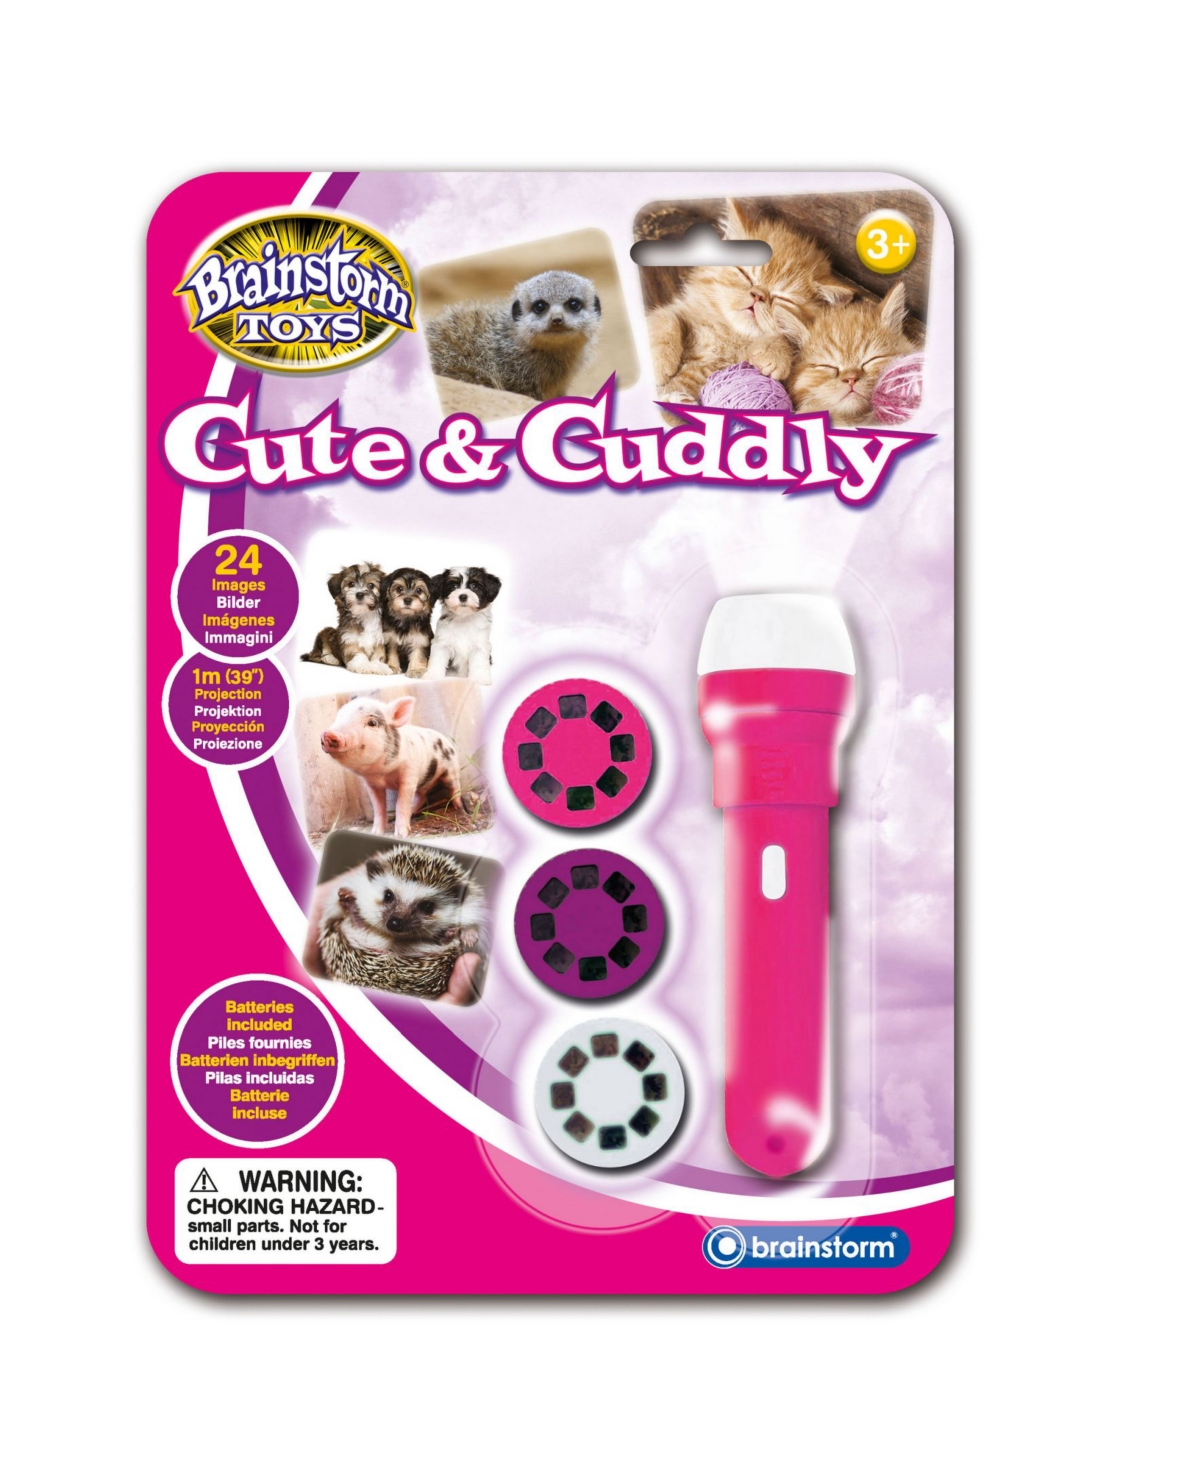 Redbox Brainstorm Toys Cute And Cuddly Flashlight And Projector With 24 Images In Multi